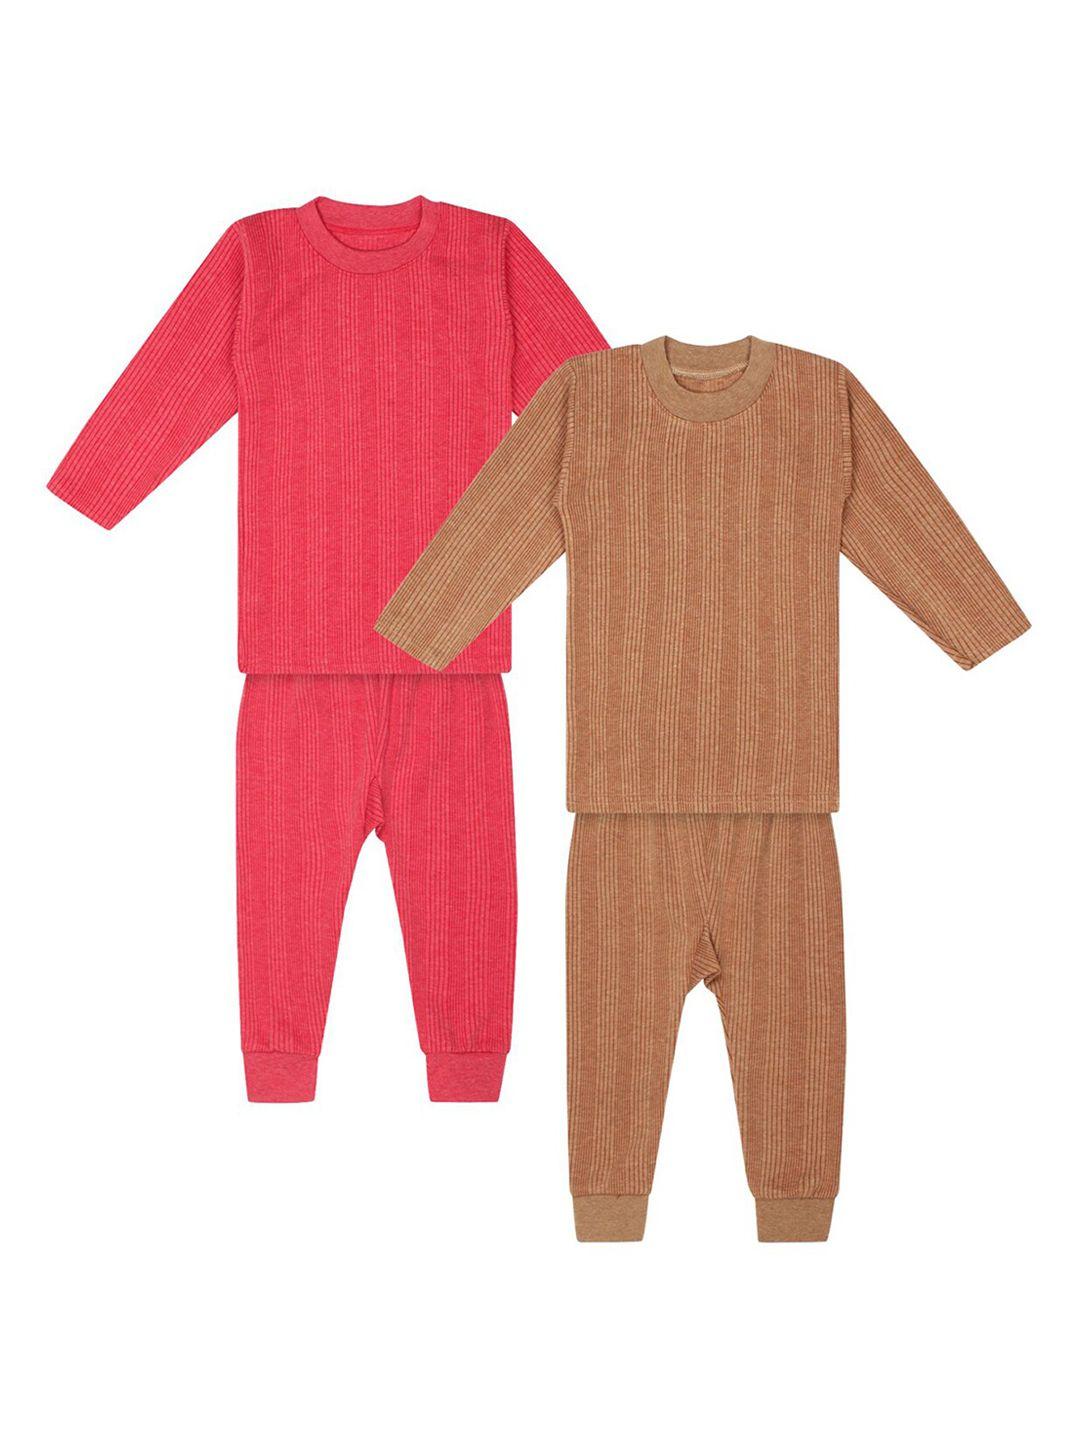 superminis-infant-pack-of-2-red-&-brown-solid-cotton-thermal-set